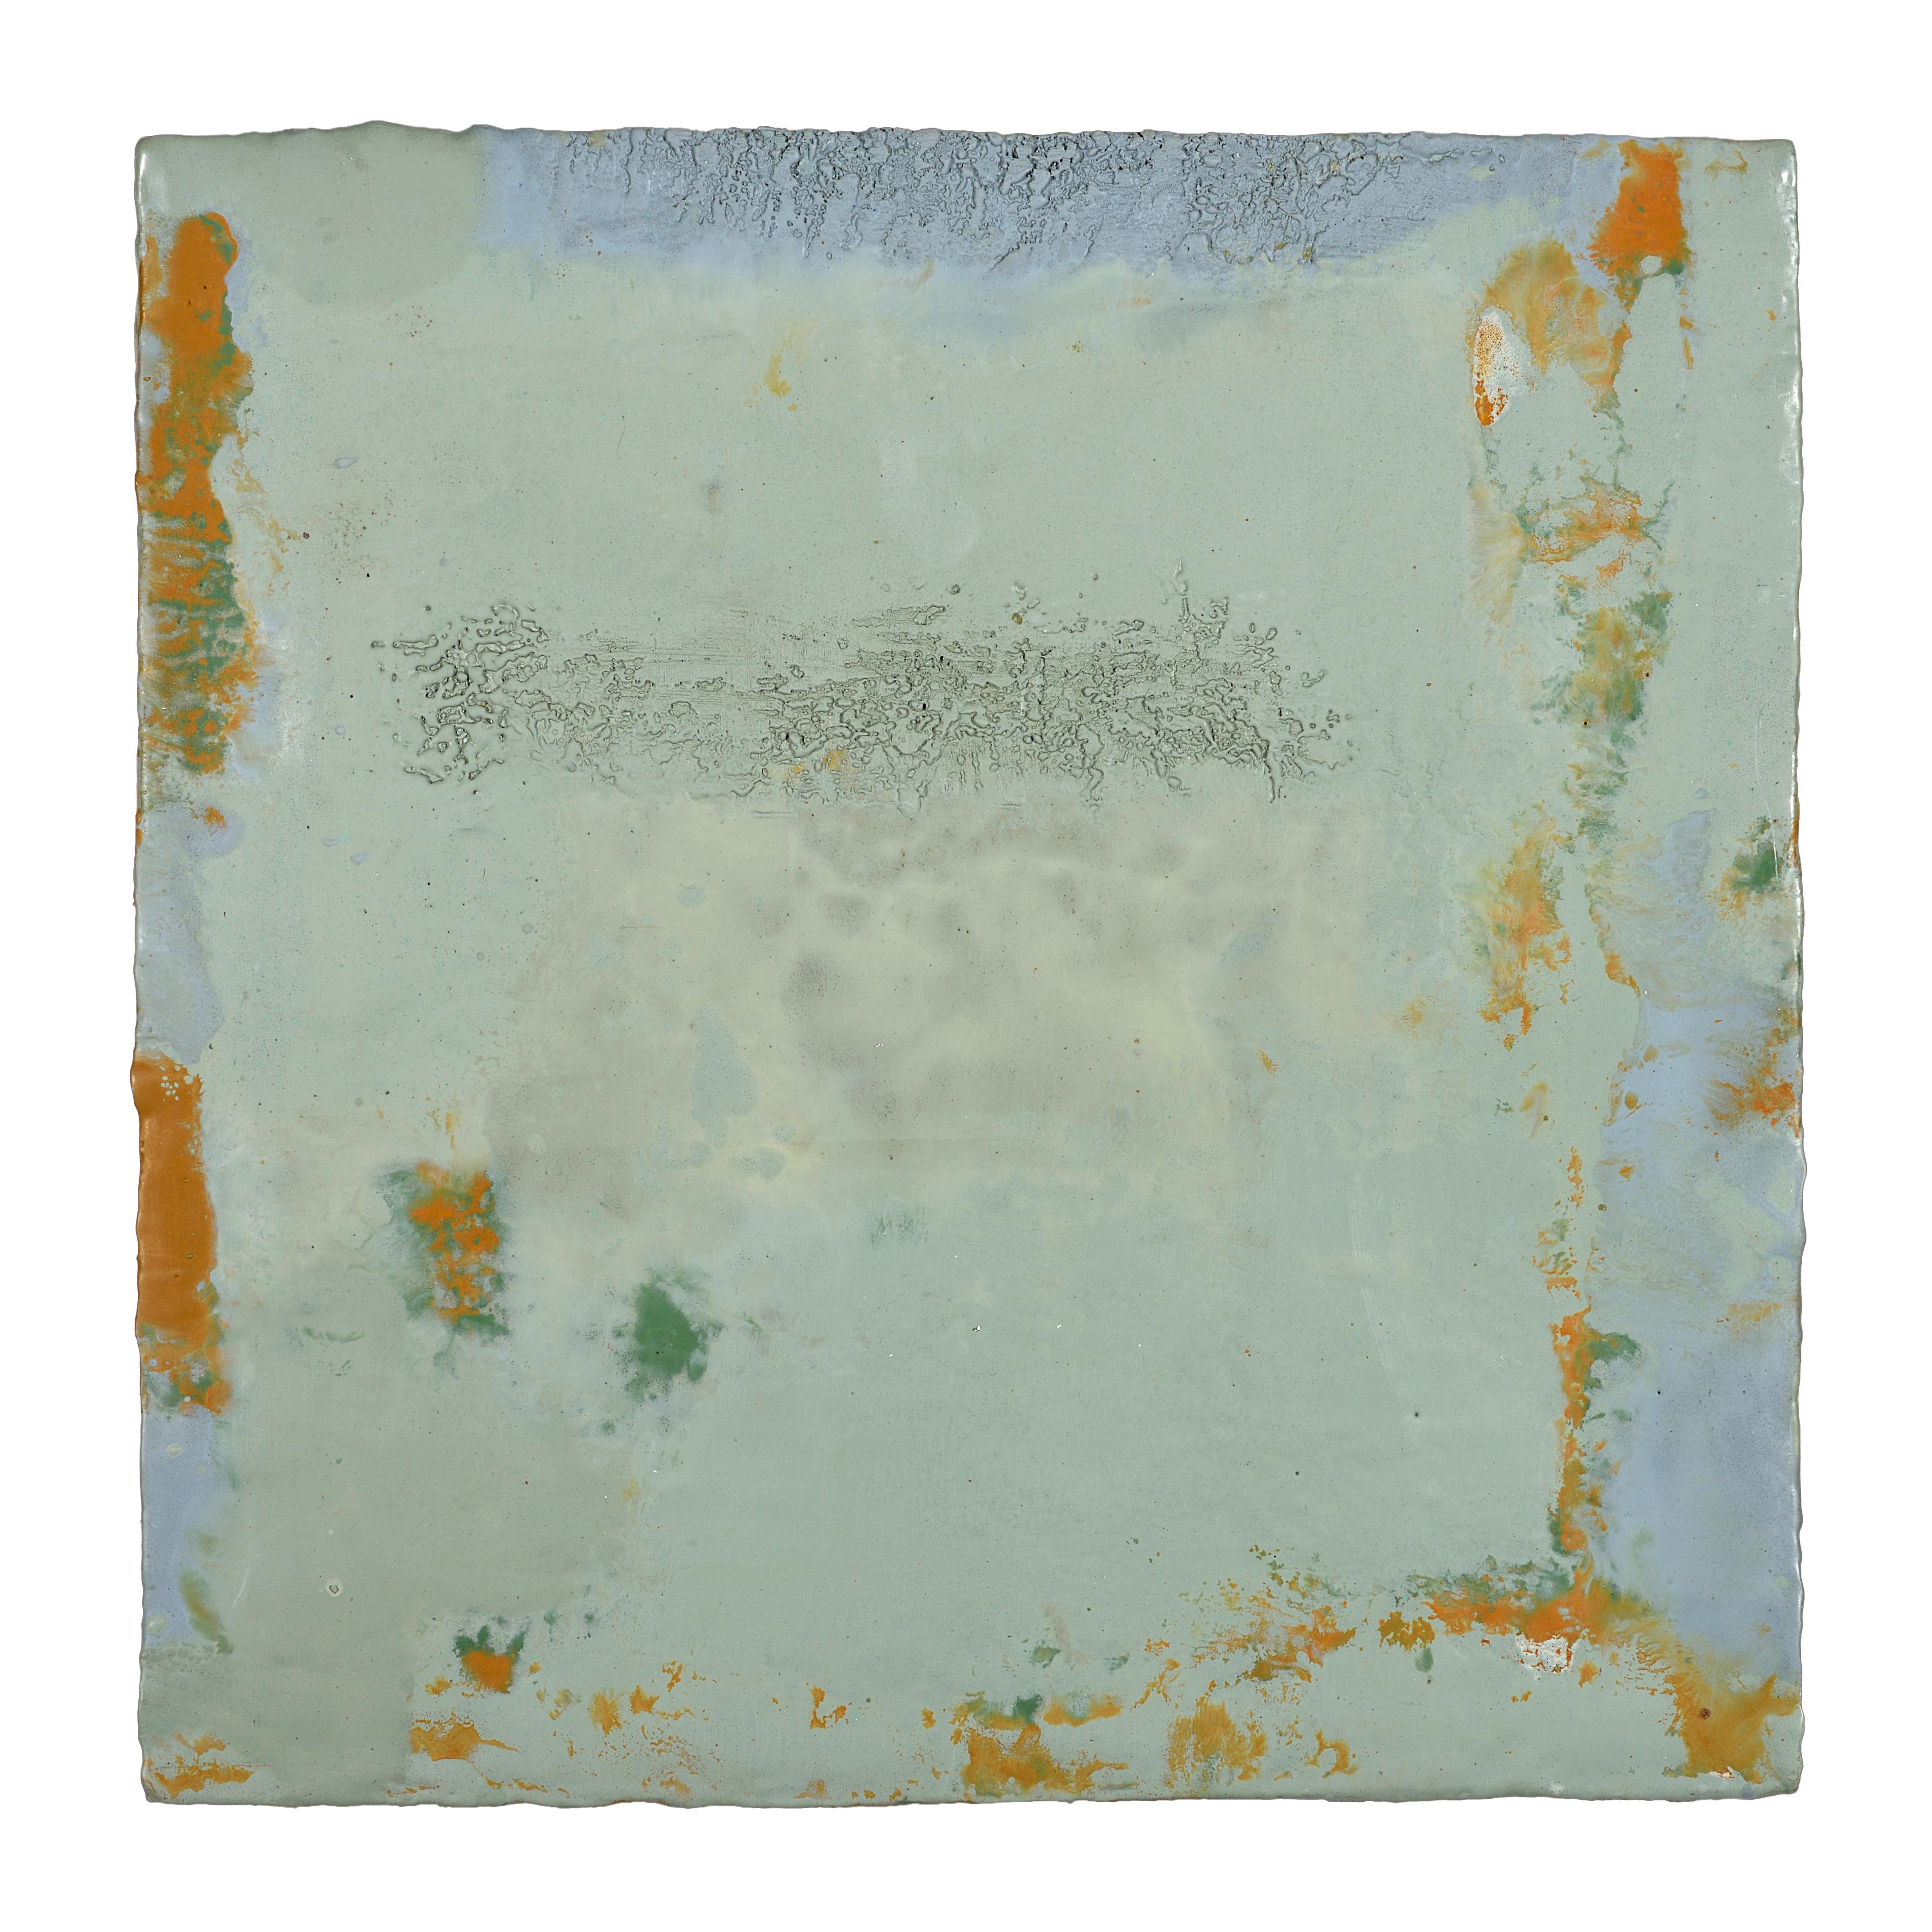 Modern Richard Hirsch Encaustic Painting of Nothing #75, 2021 For Sale